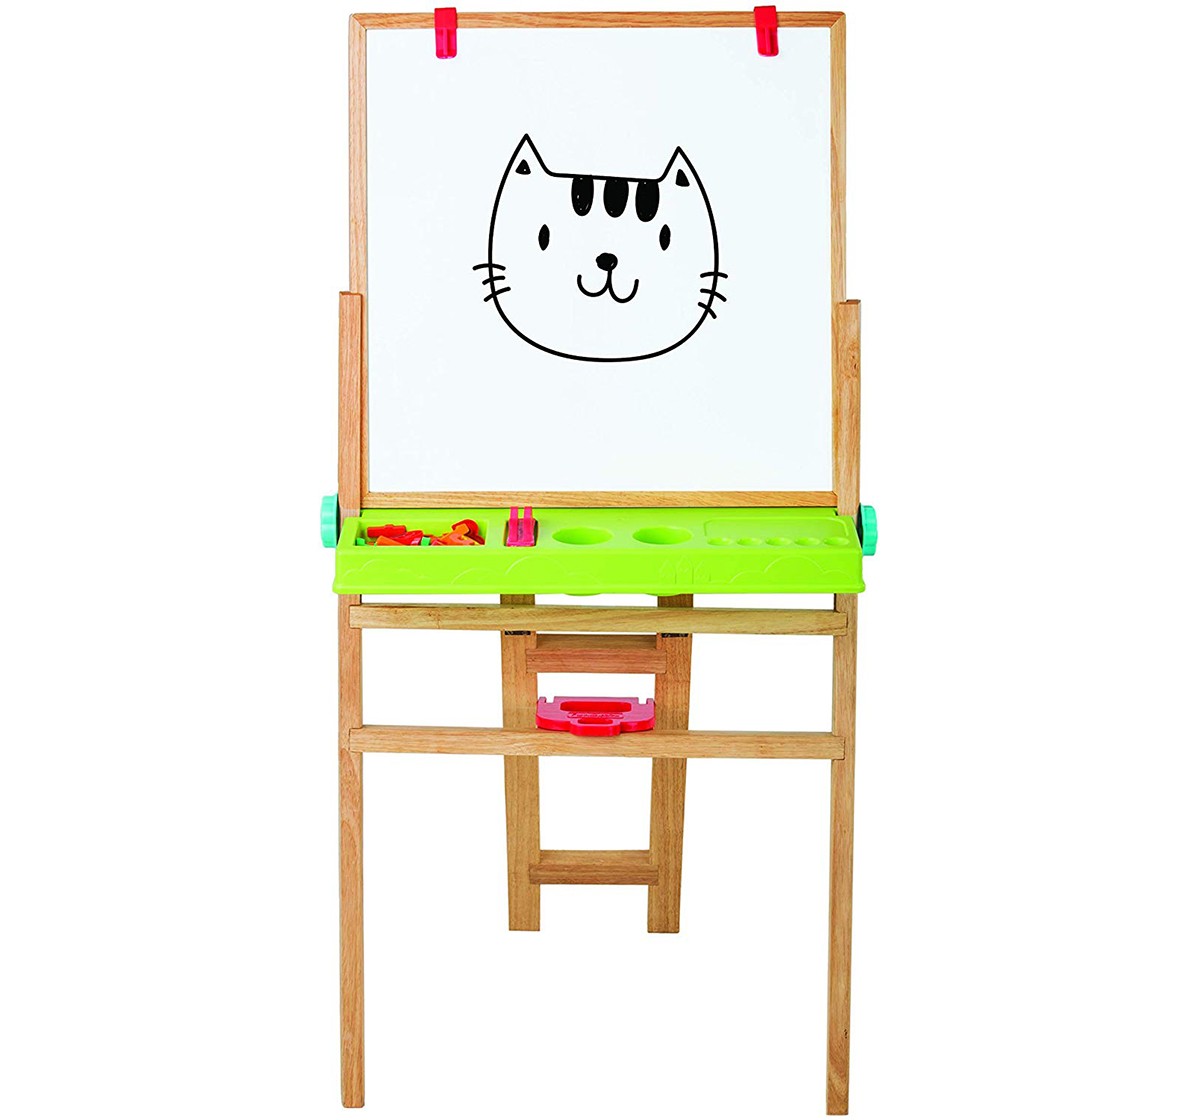 Giggles My First New Easel - Brown Activity Table & Boards for Kids age 3Y+ (Brown)